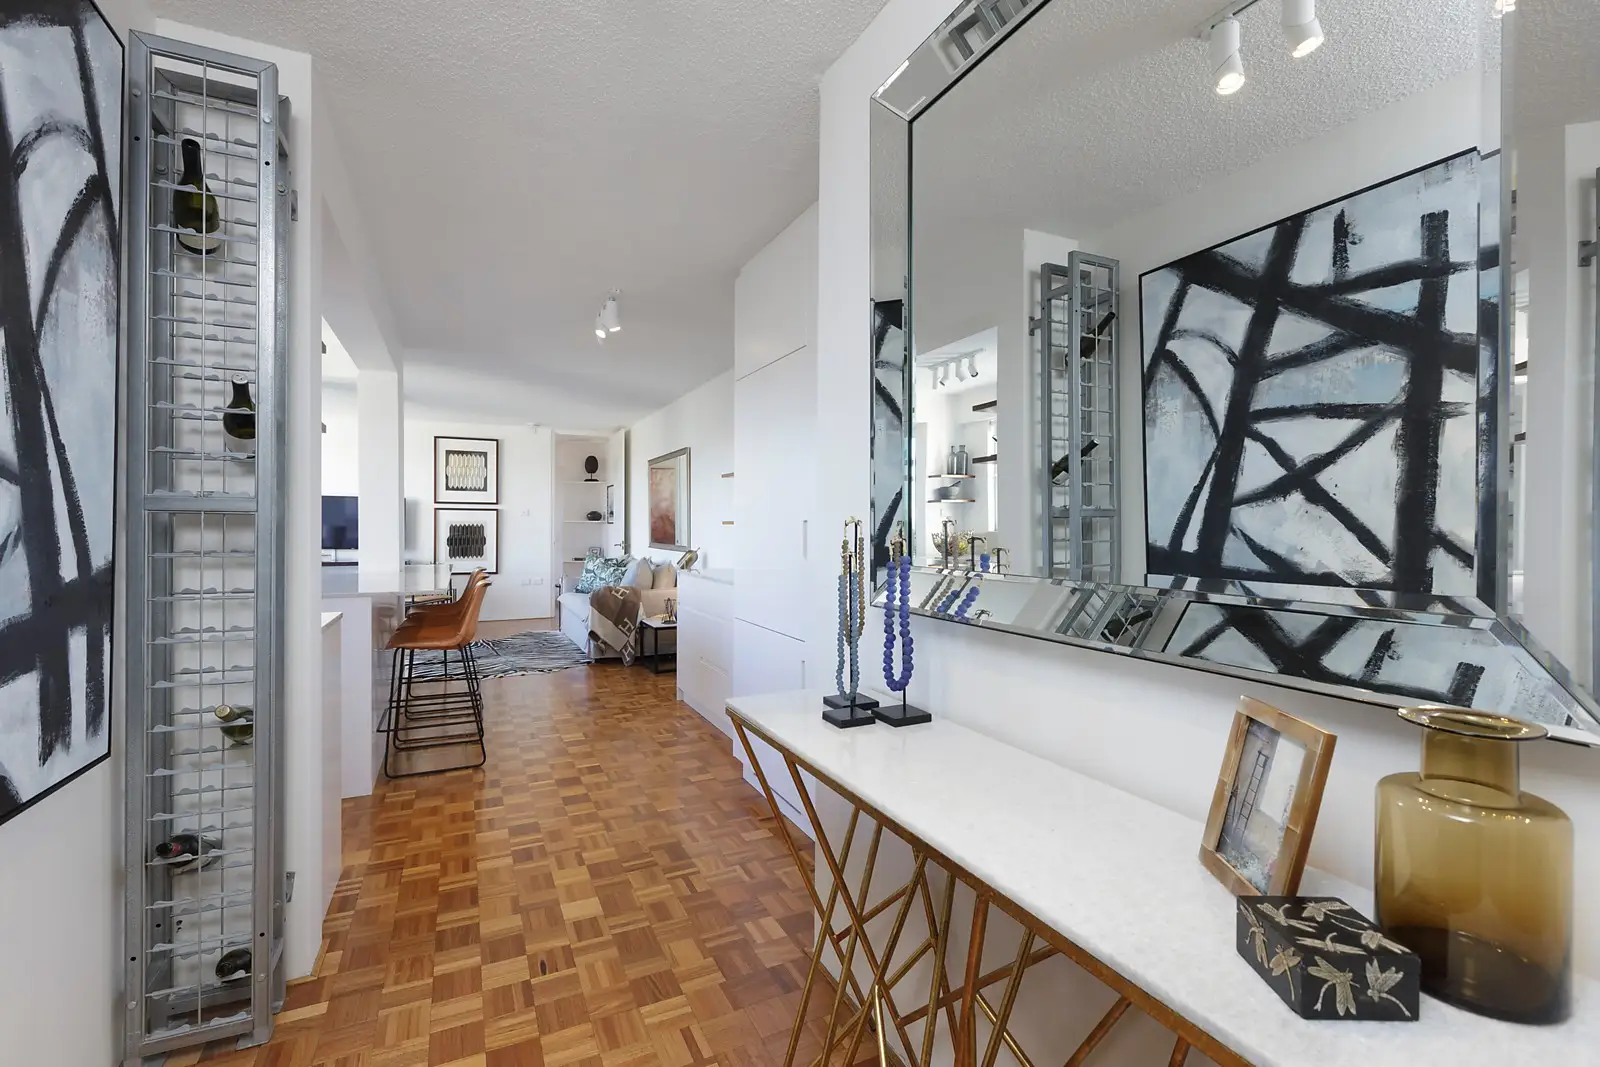 Photo #2: 28/5 St Marks Road, Darling Point - Sold by Sydney Sotheby's International Realty